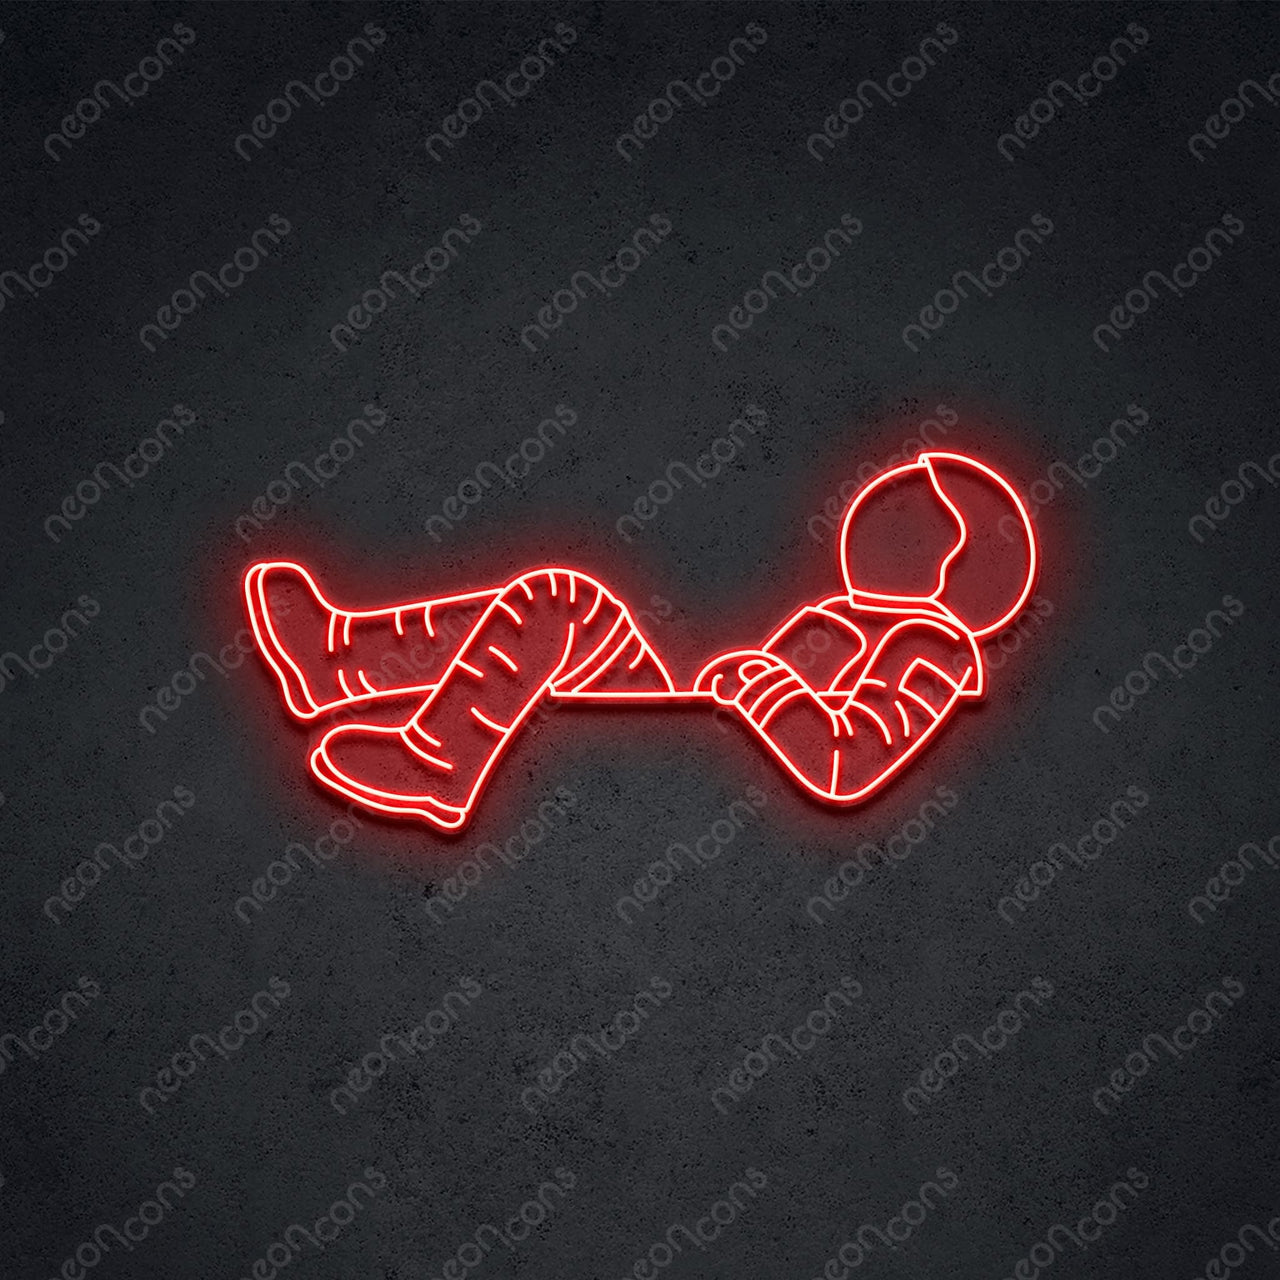 "Lost in Space" LED Neon Sign 60cm (2ft) / Red / LED Neon by Neon Icons